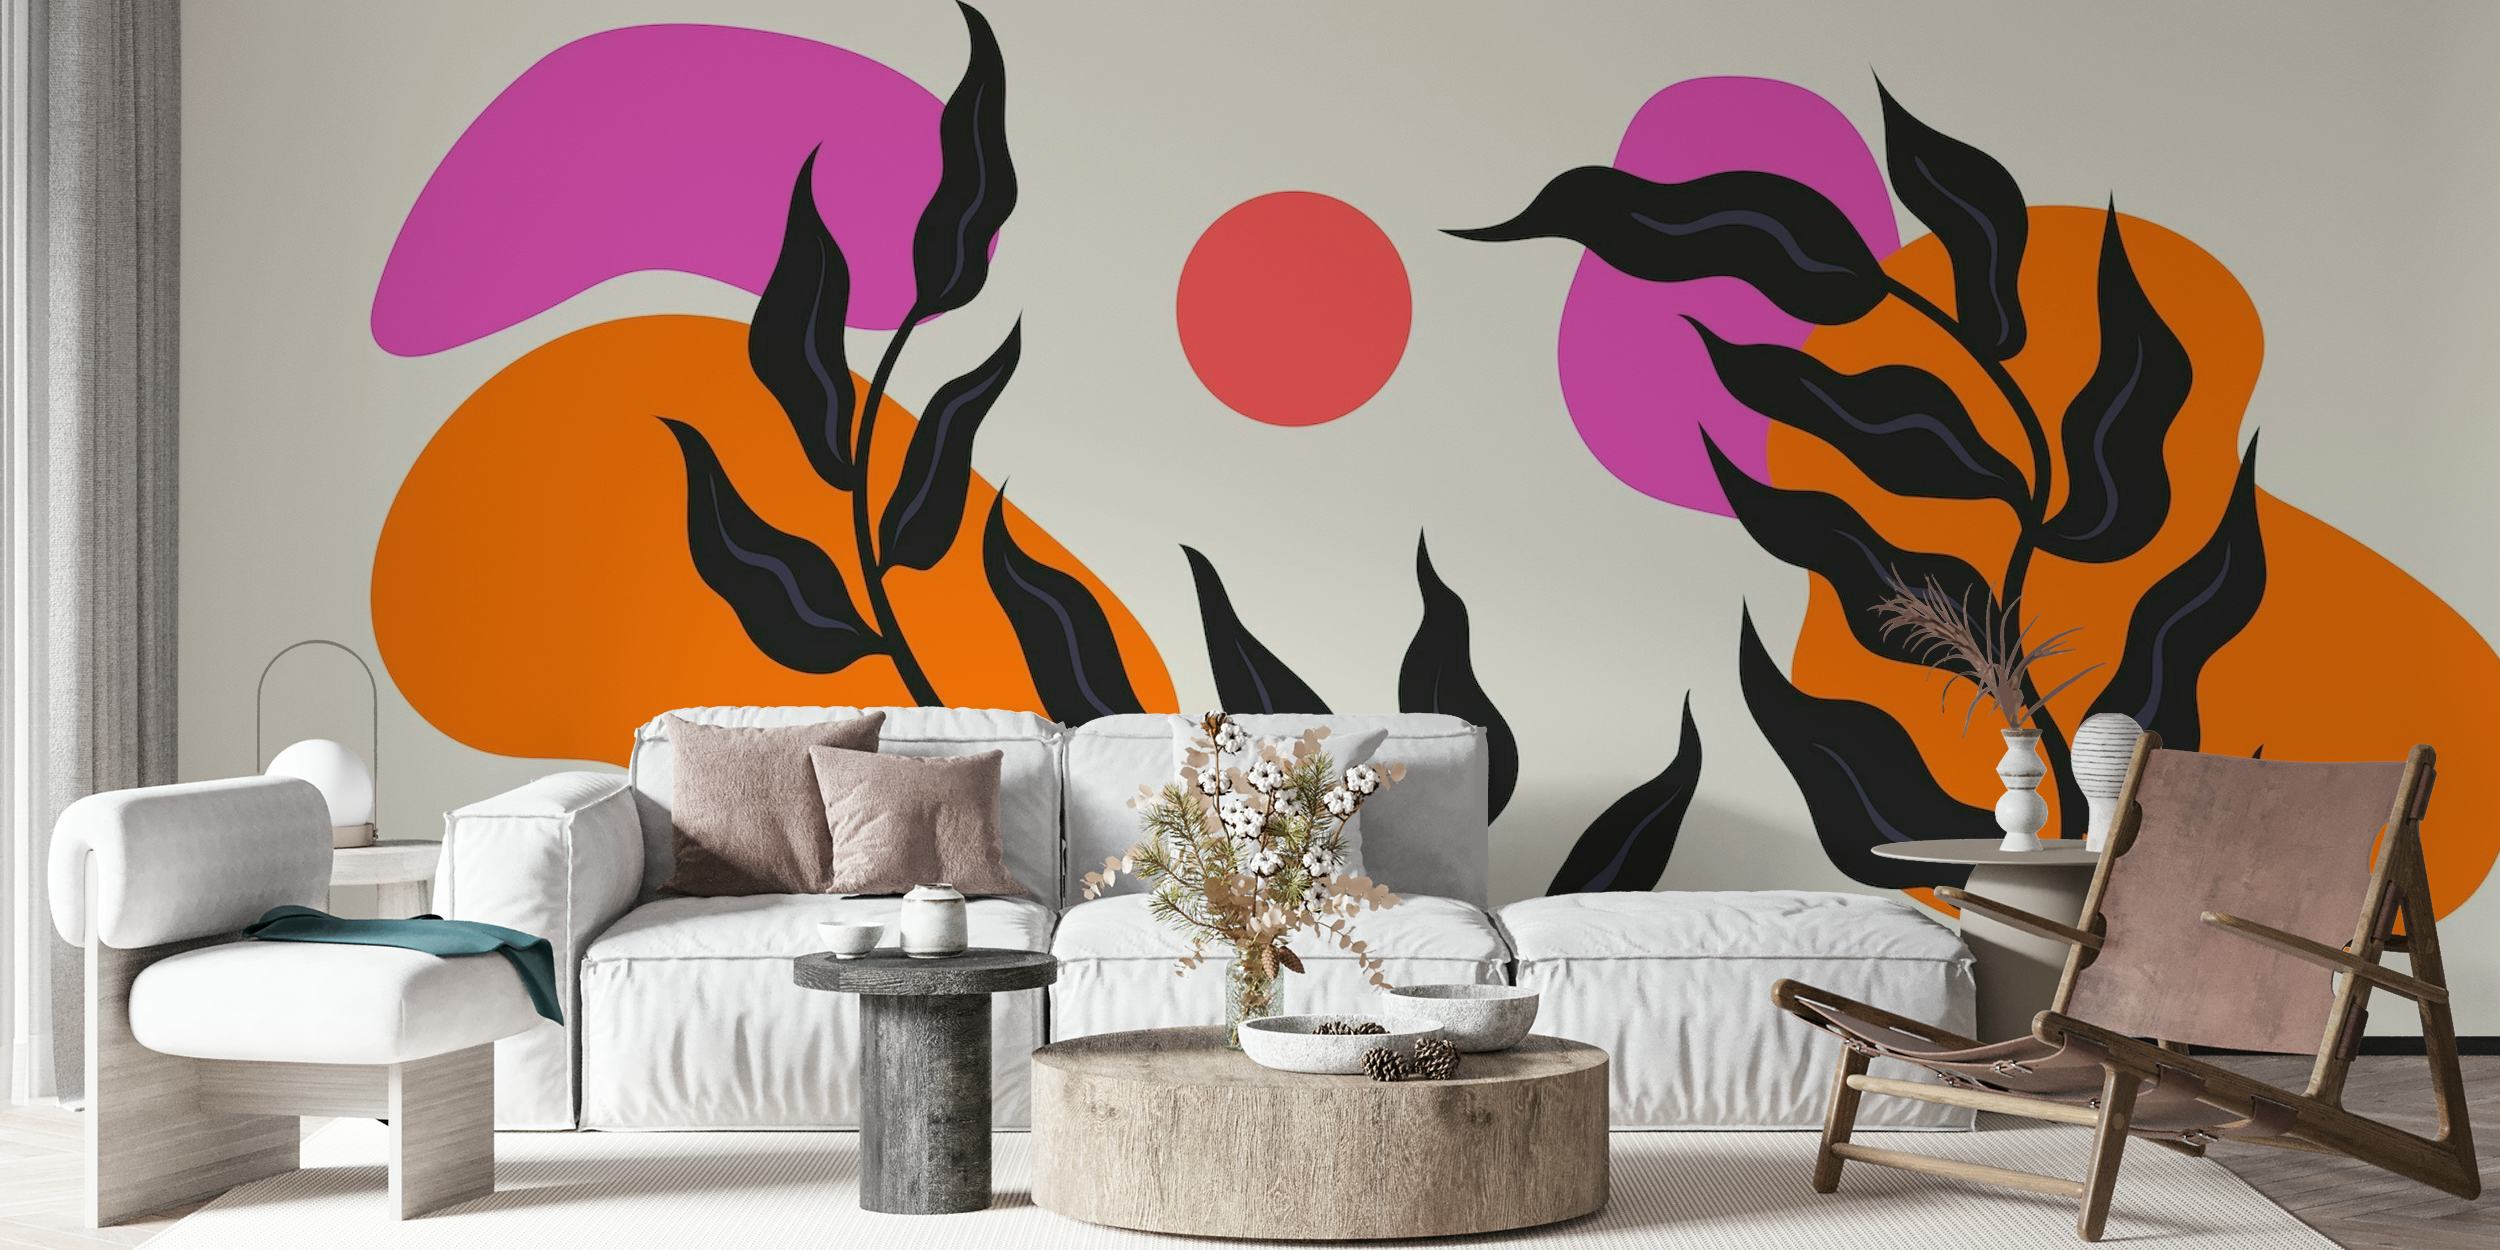 Vivid Mid Century Bauhaus Black Leaves wall mural with black, orange, and lilac design elements